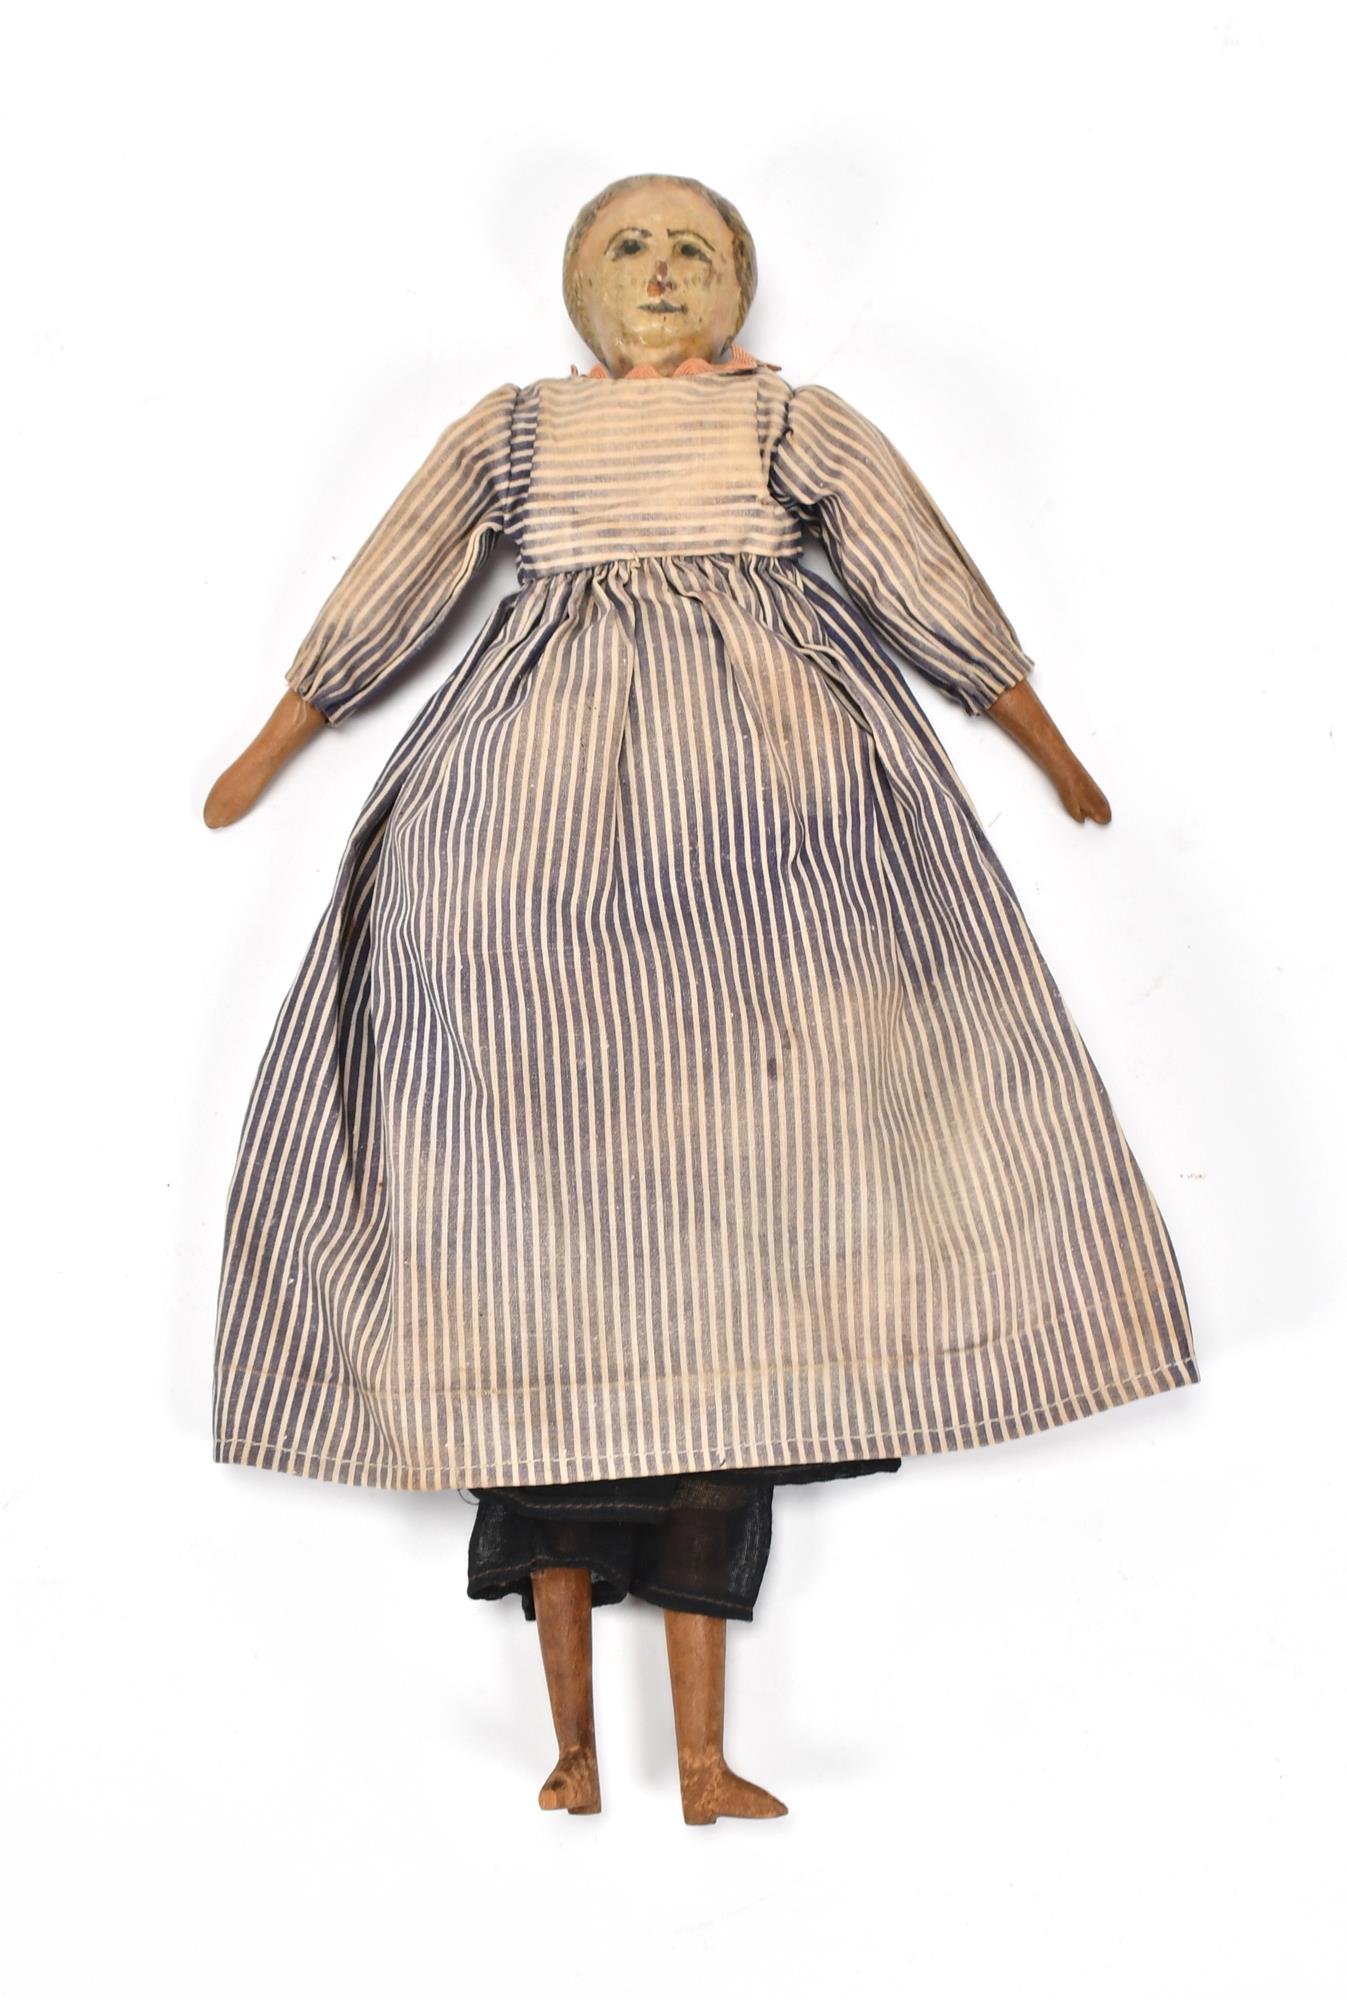 19TH C WOOD AND FABRIC DOLL Early 3acc8a